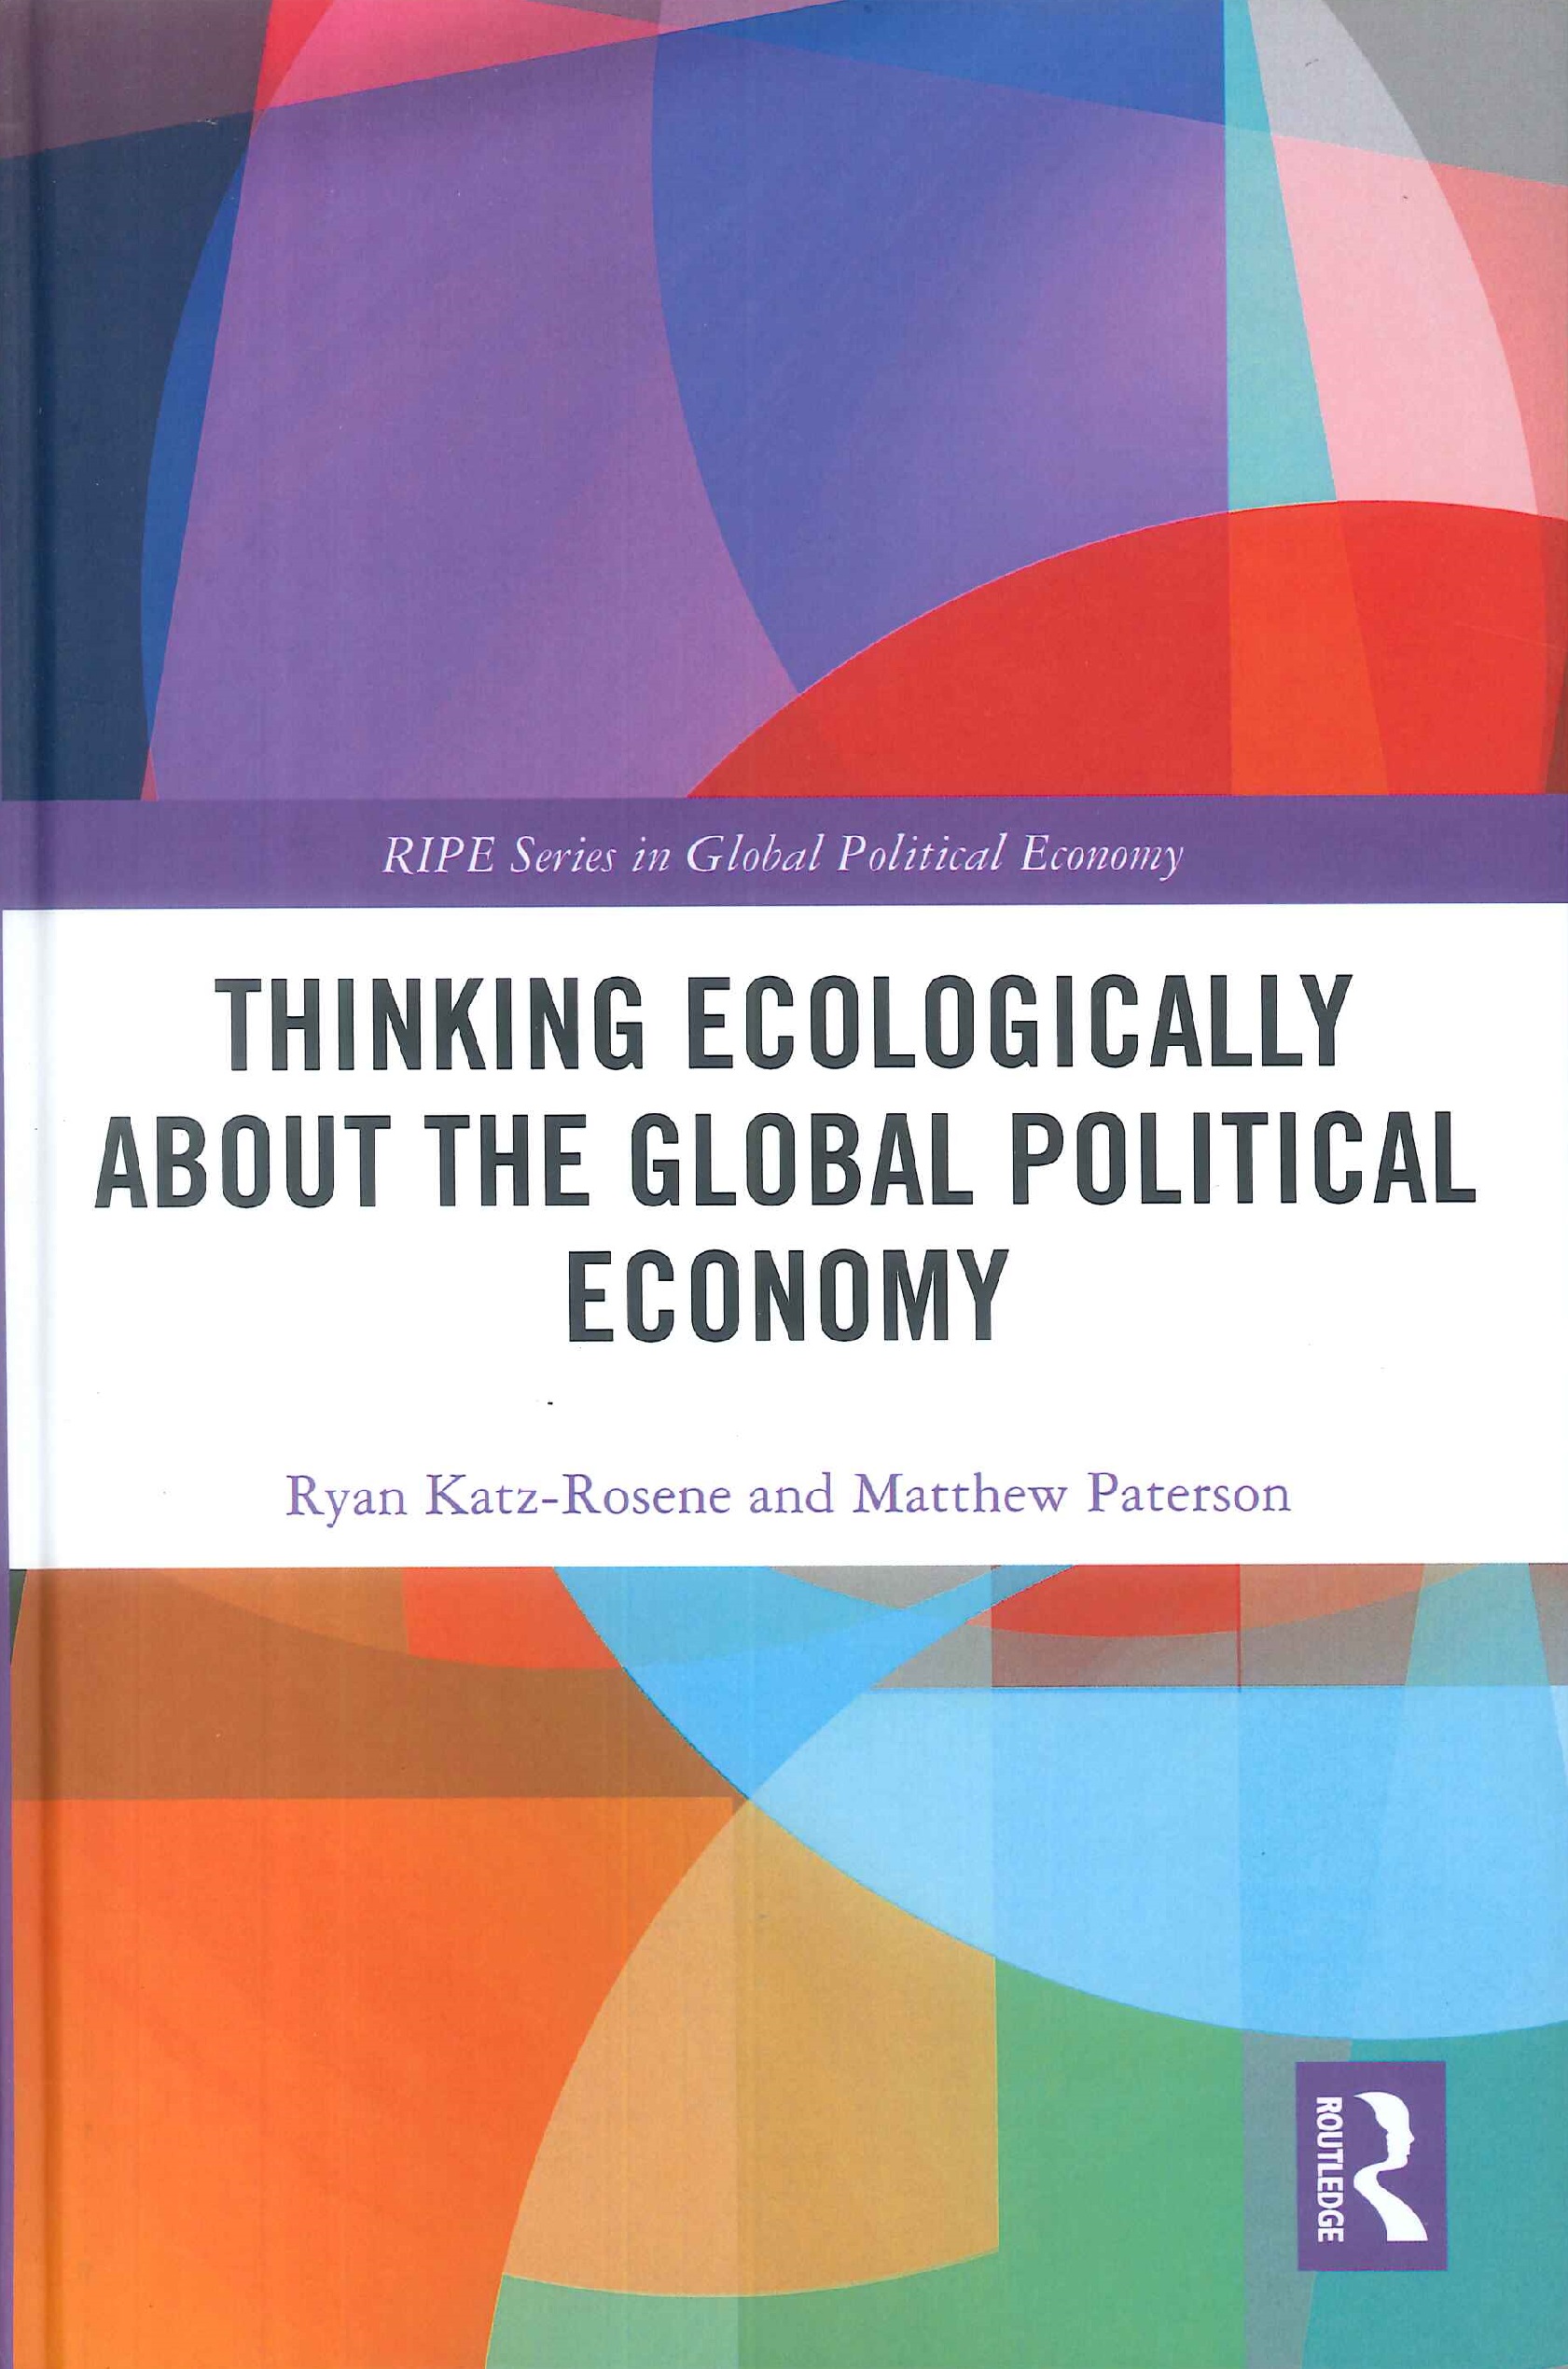 Thinking ecologically about the global political economy